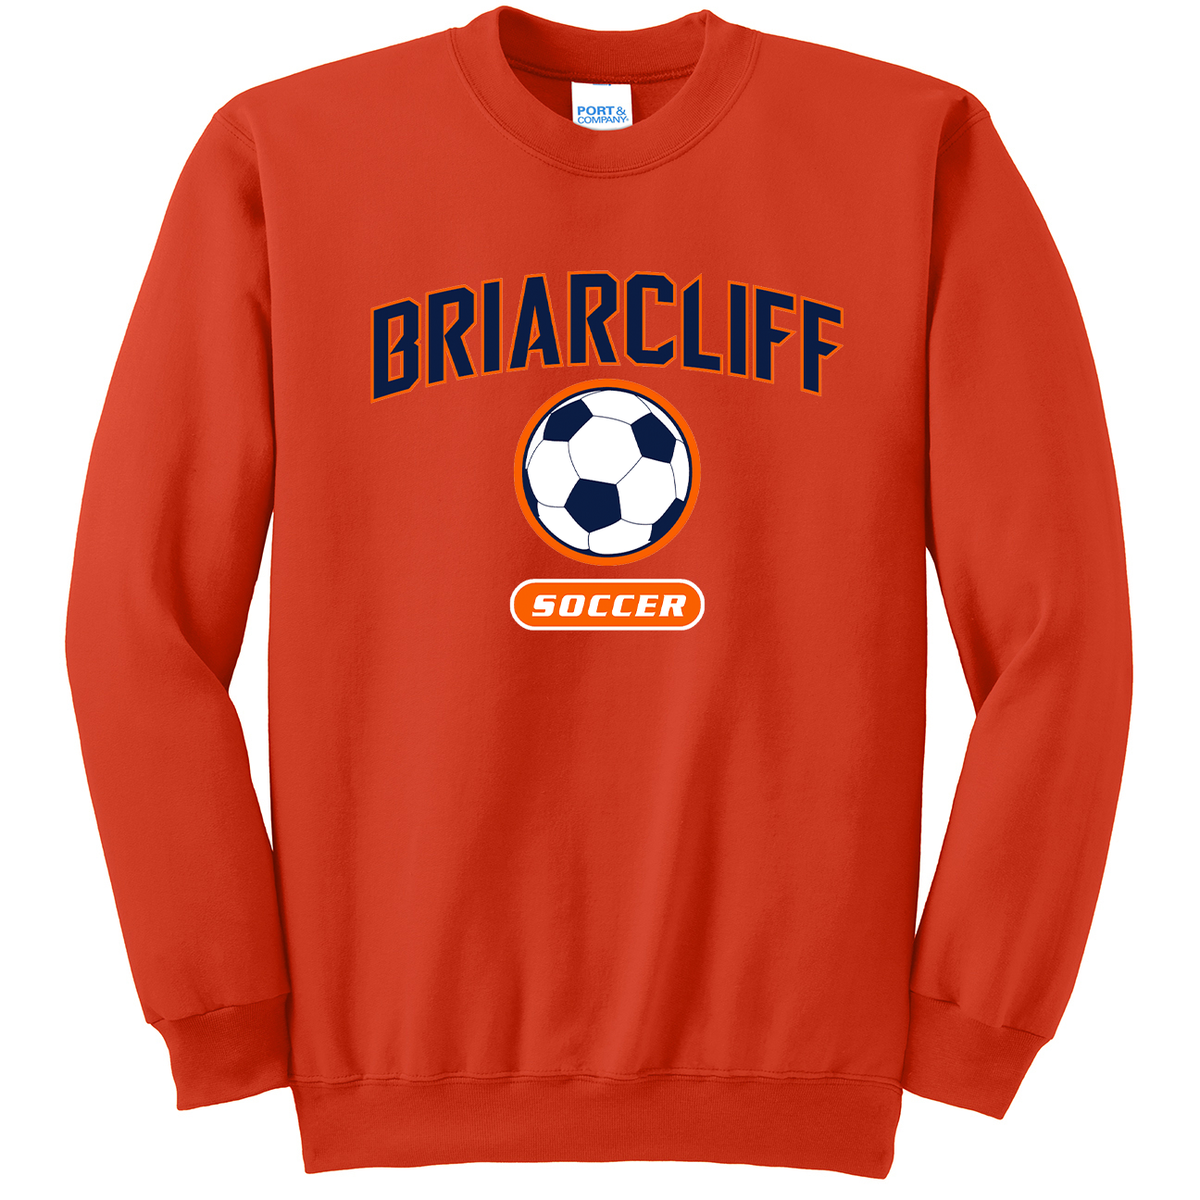 Briarcliff Soccer Crew Neck Sweater